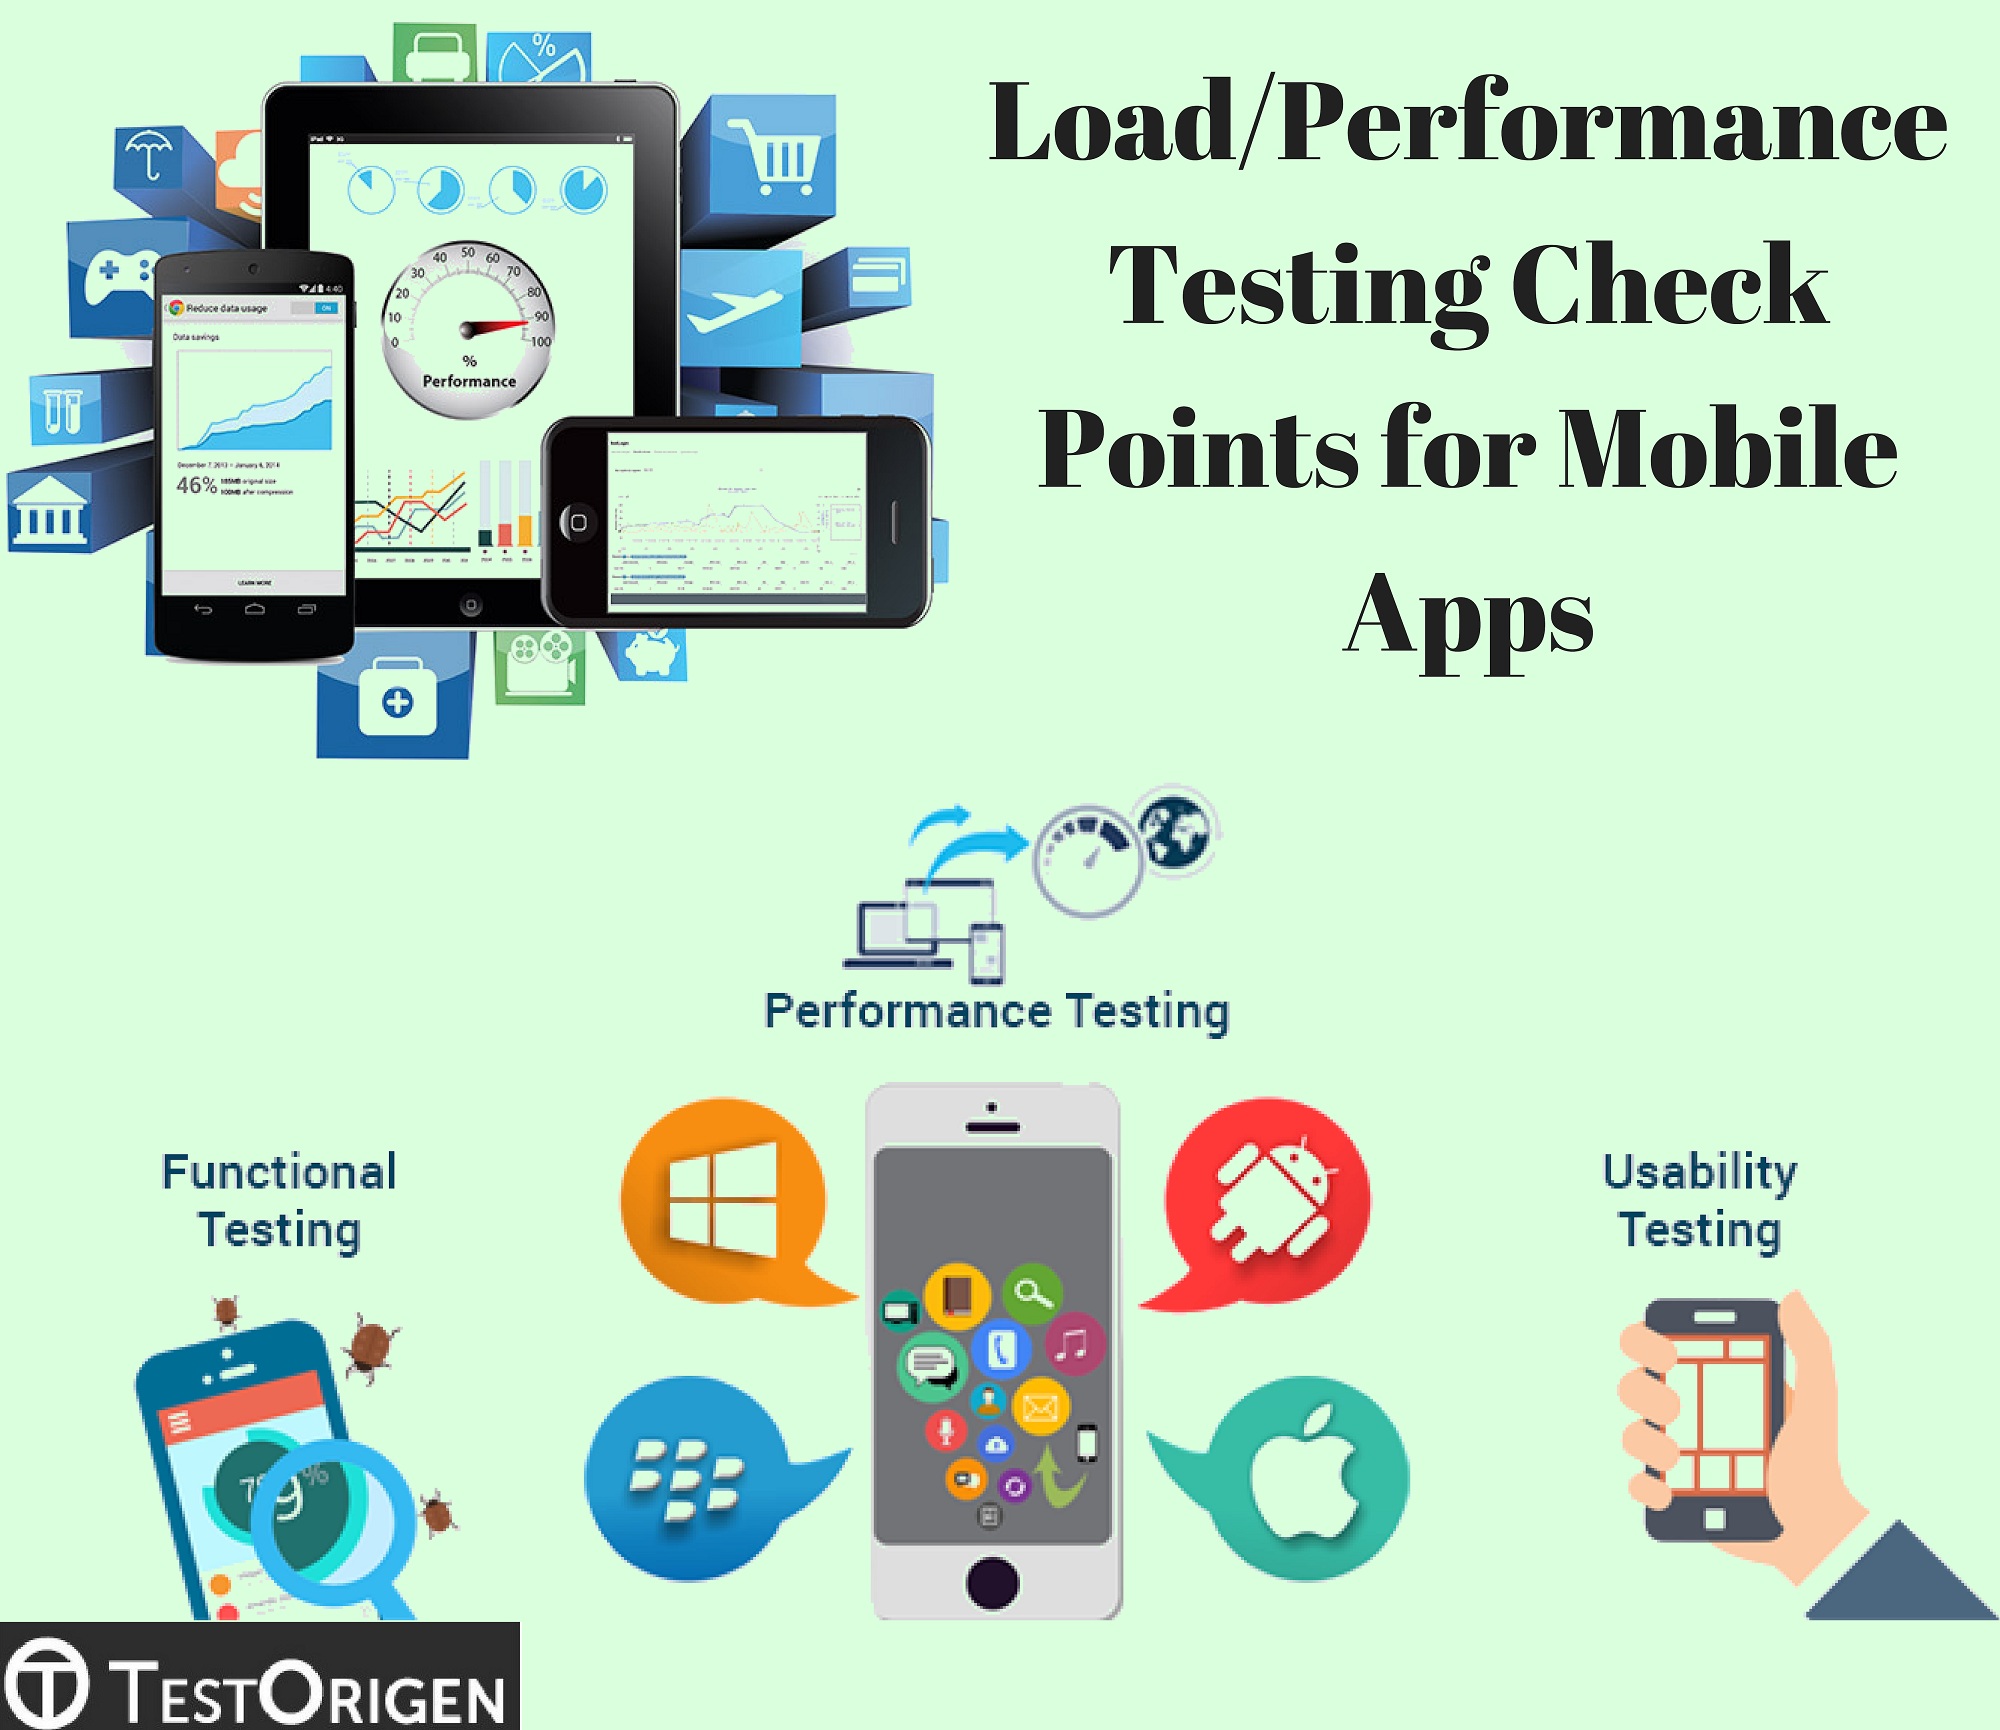 Load/Performance Testing Check Points for Mobile Apps